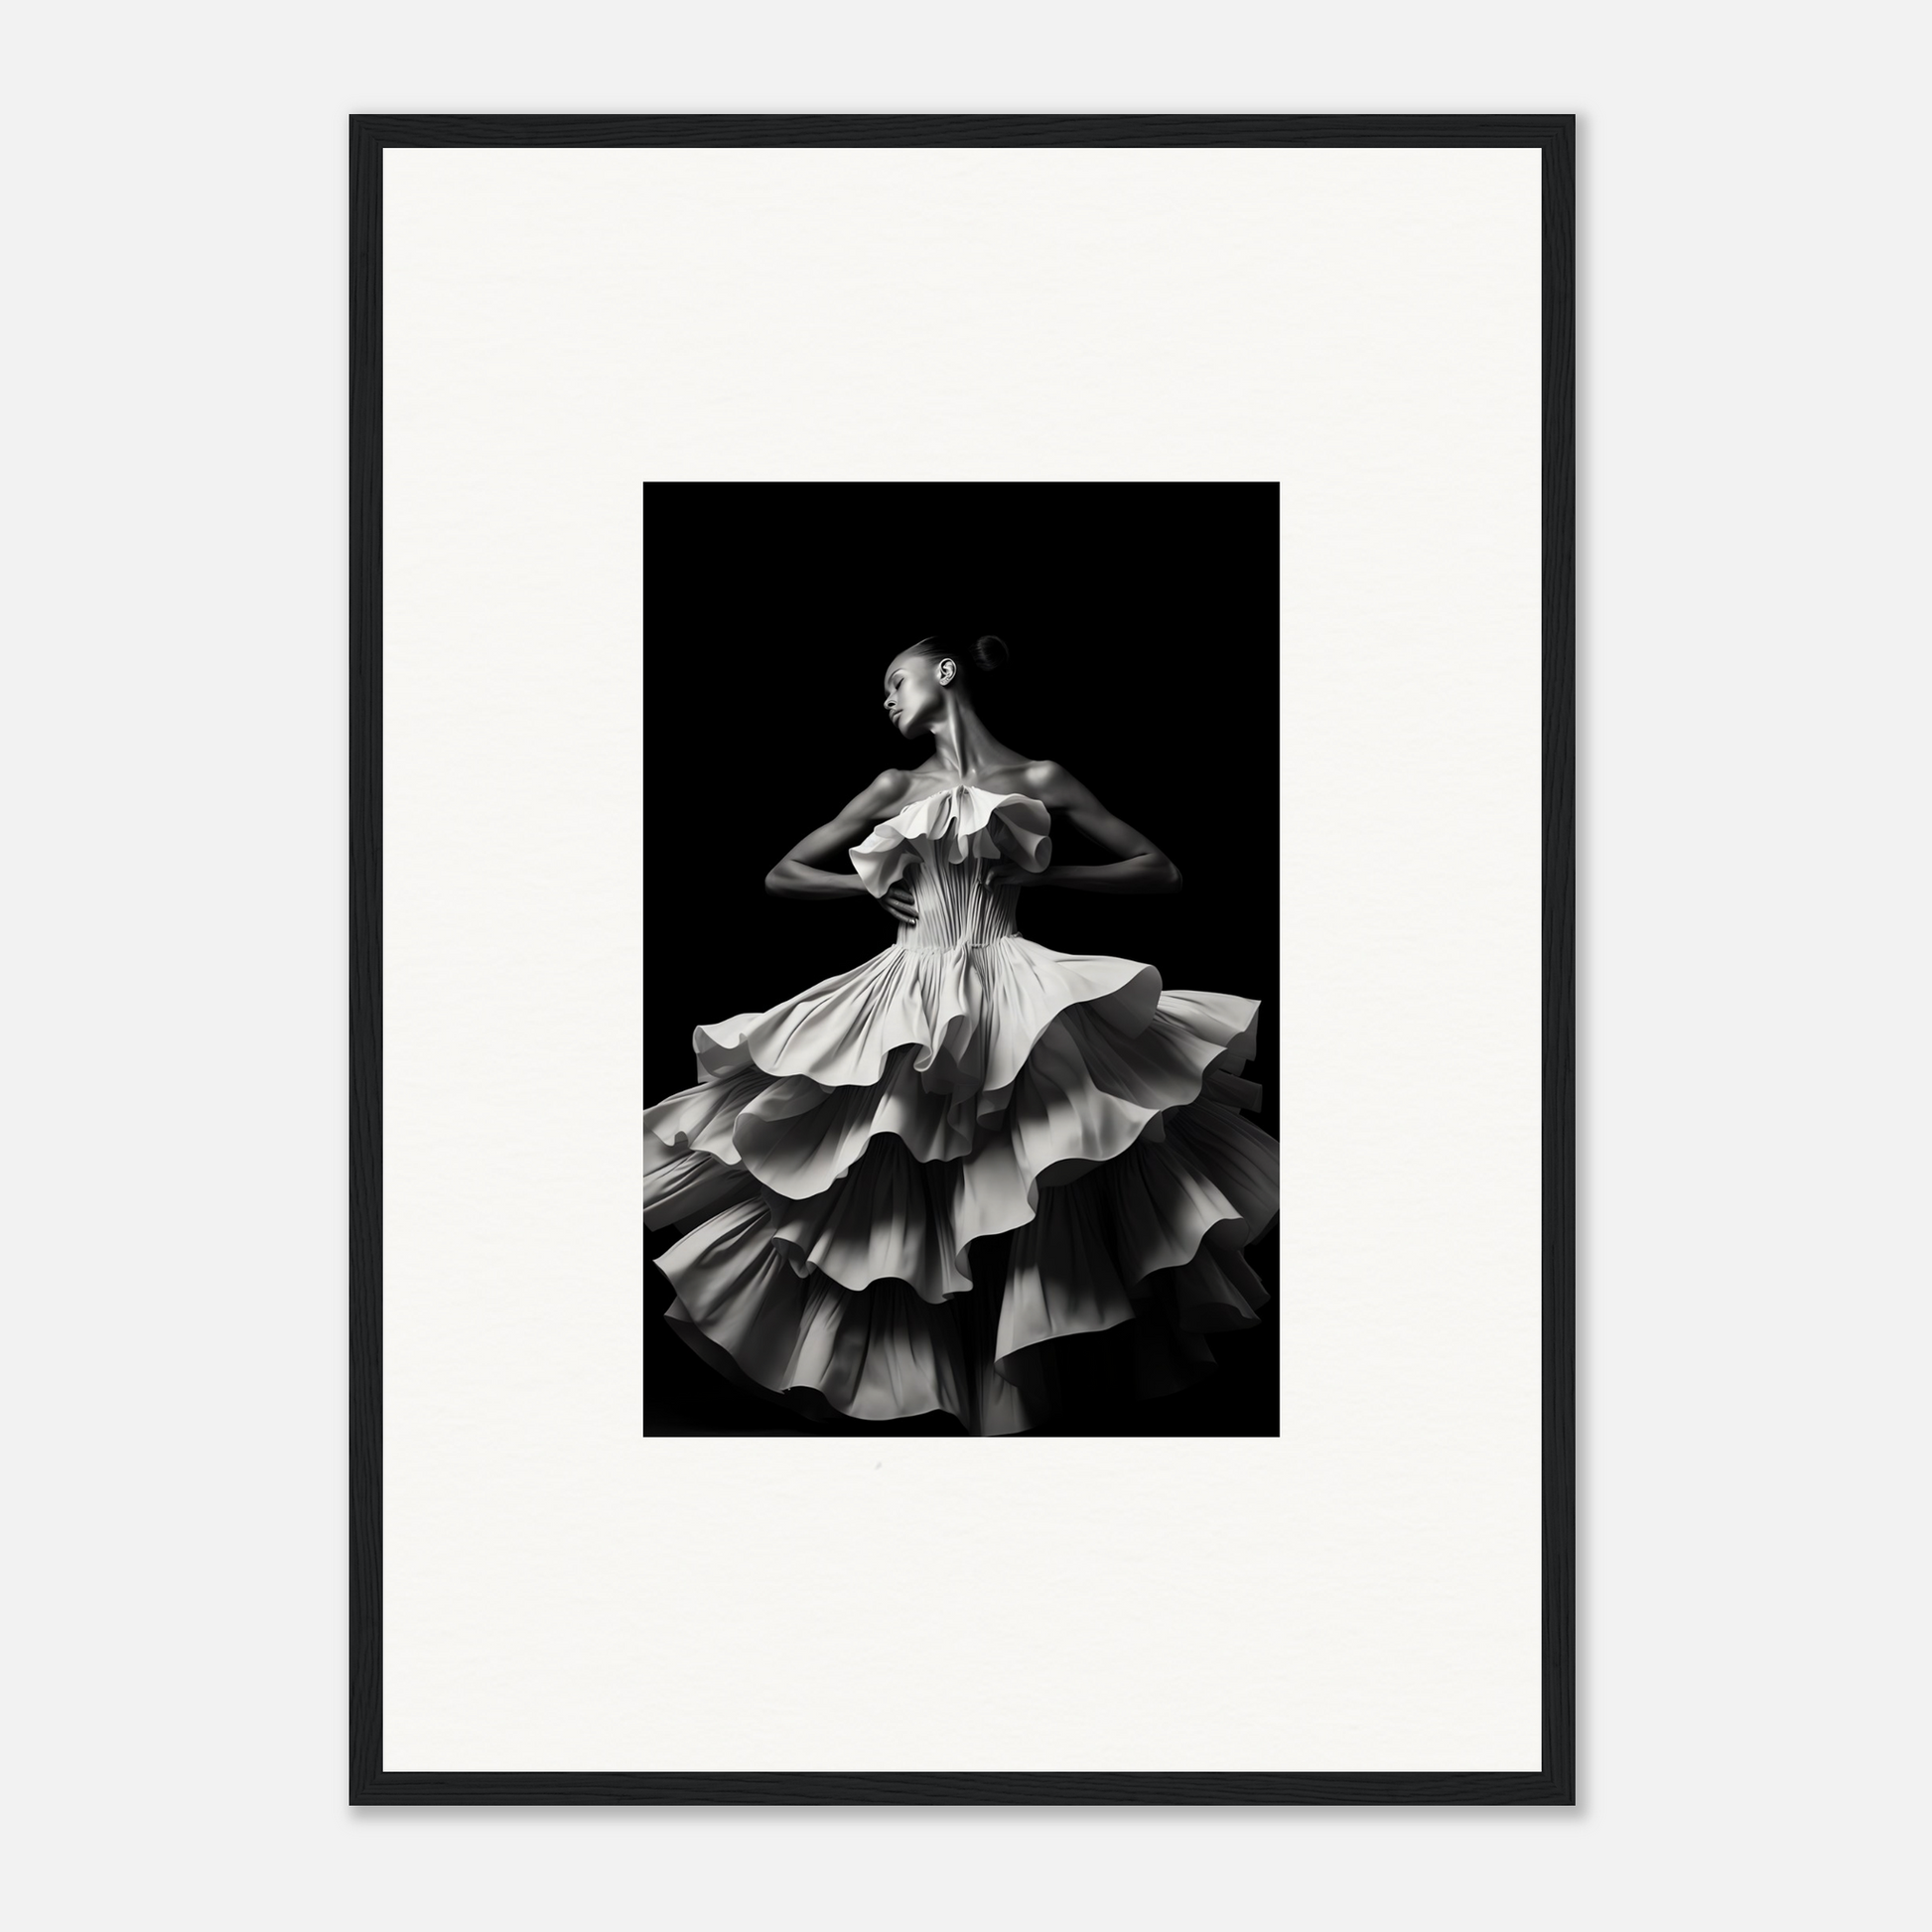 Dancers and time a2 - framed poster - print material